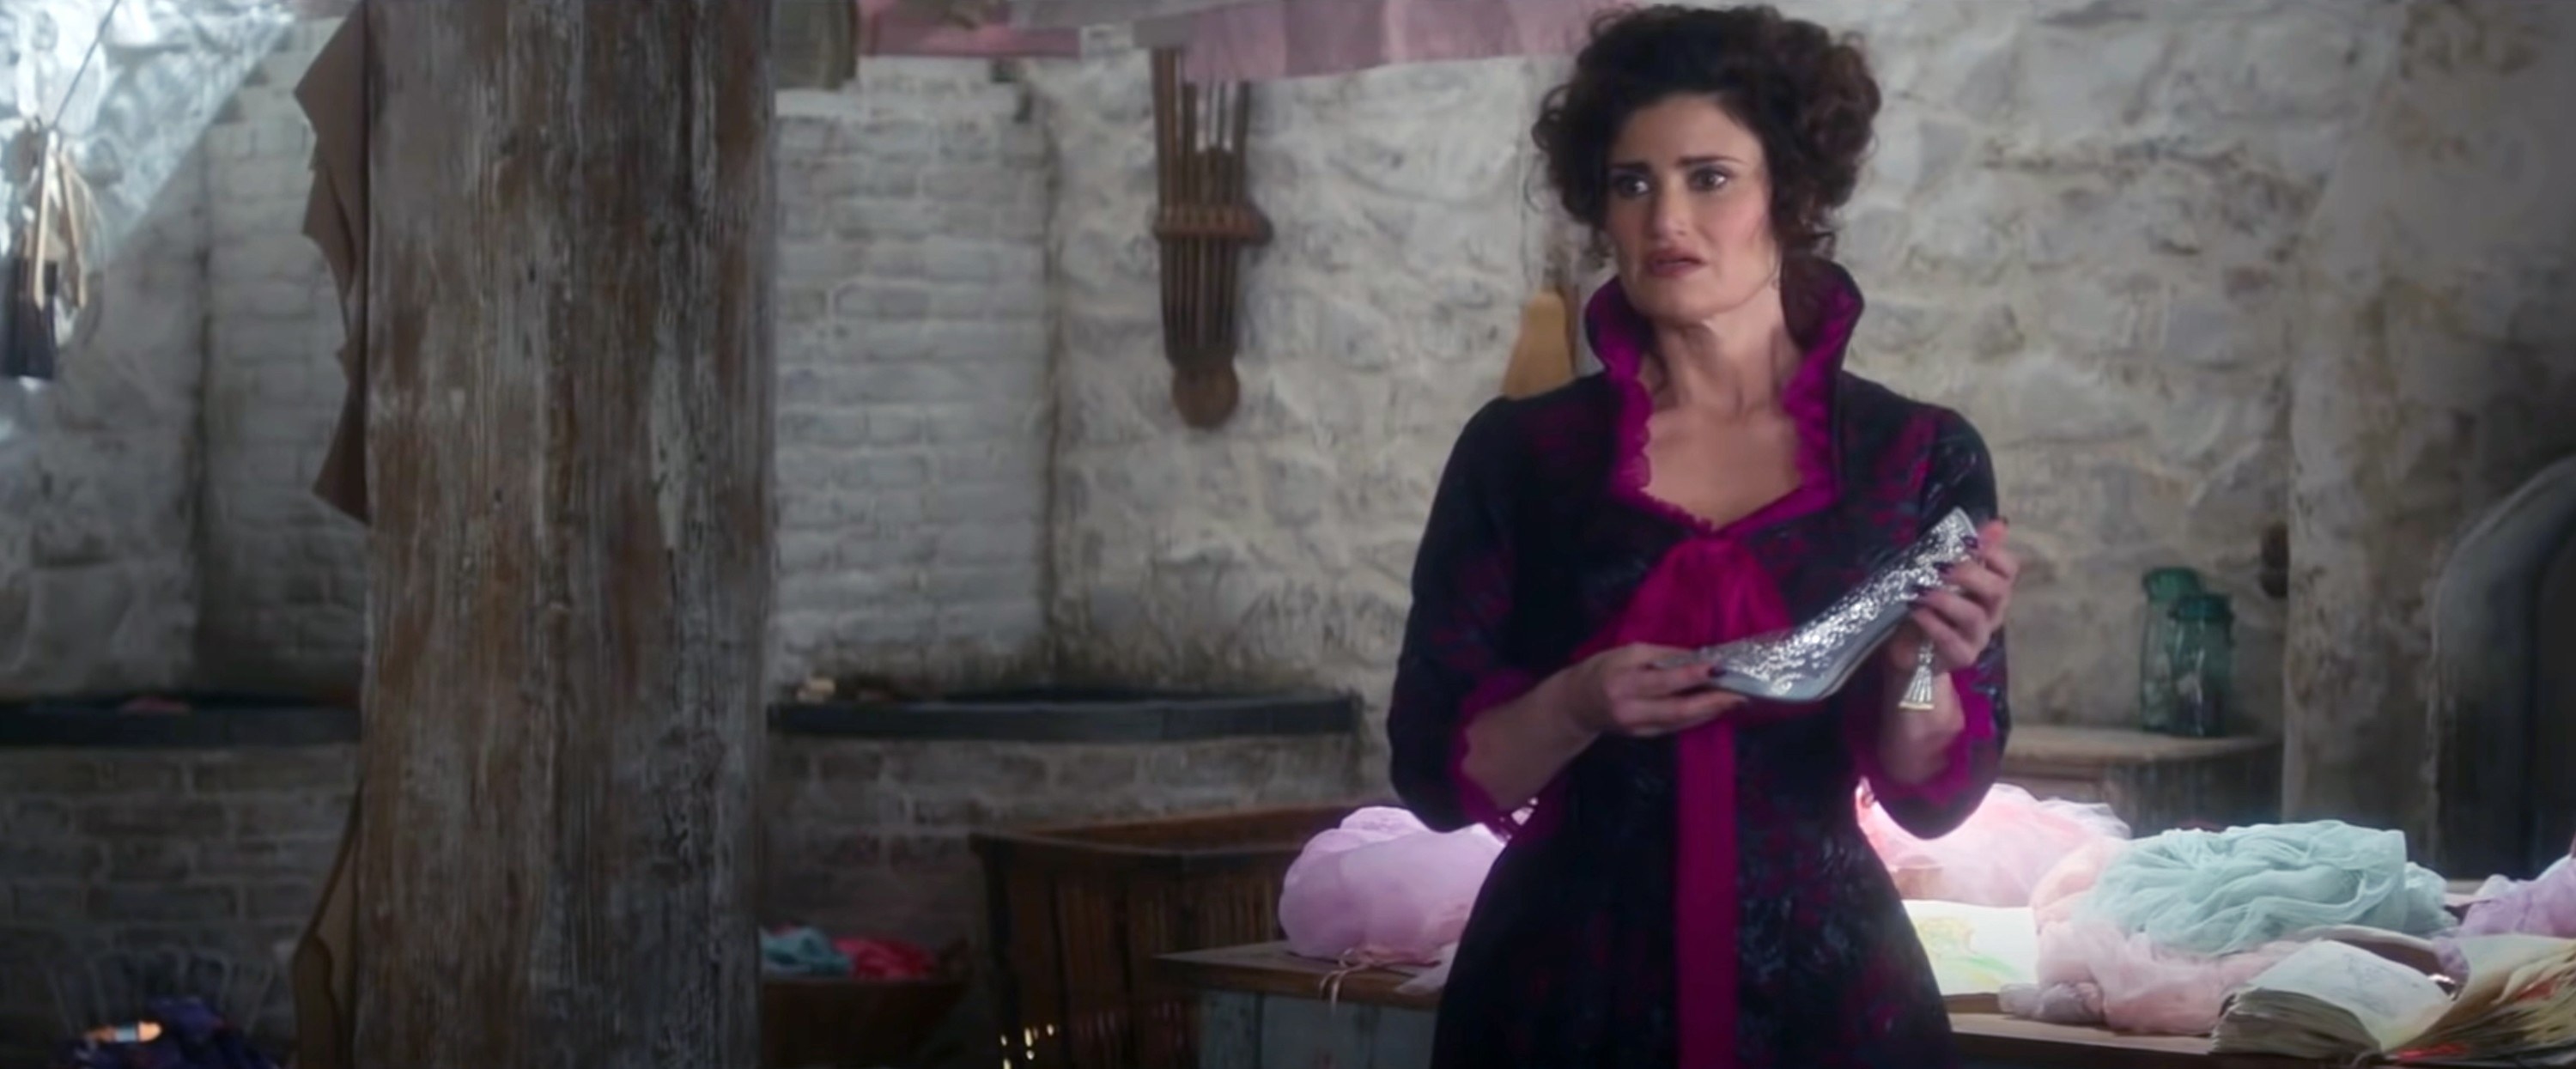 Idina as the stepmother, singing while holding the glass slipper and looking sad